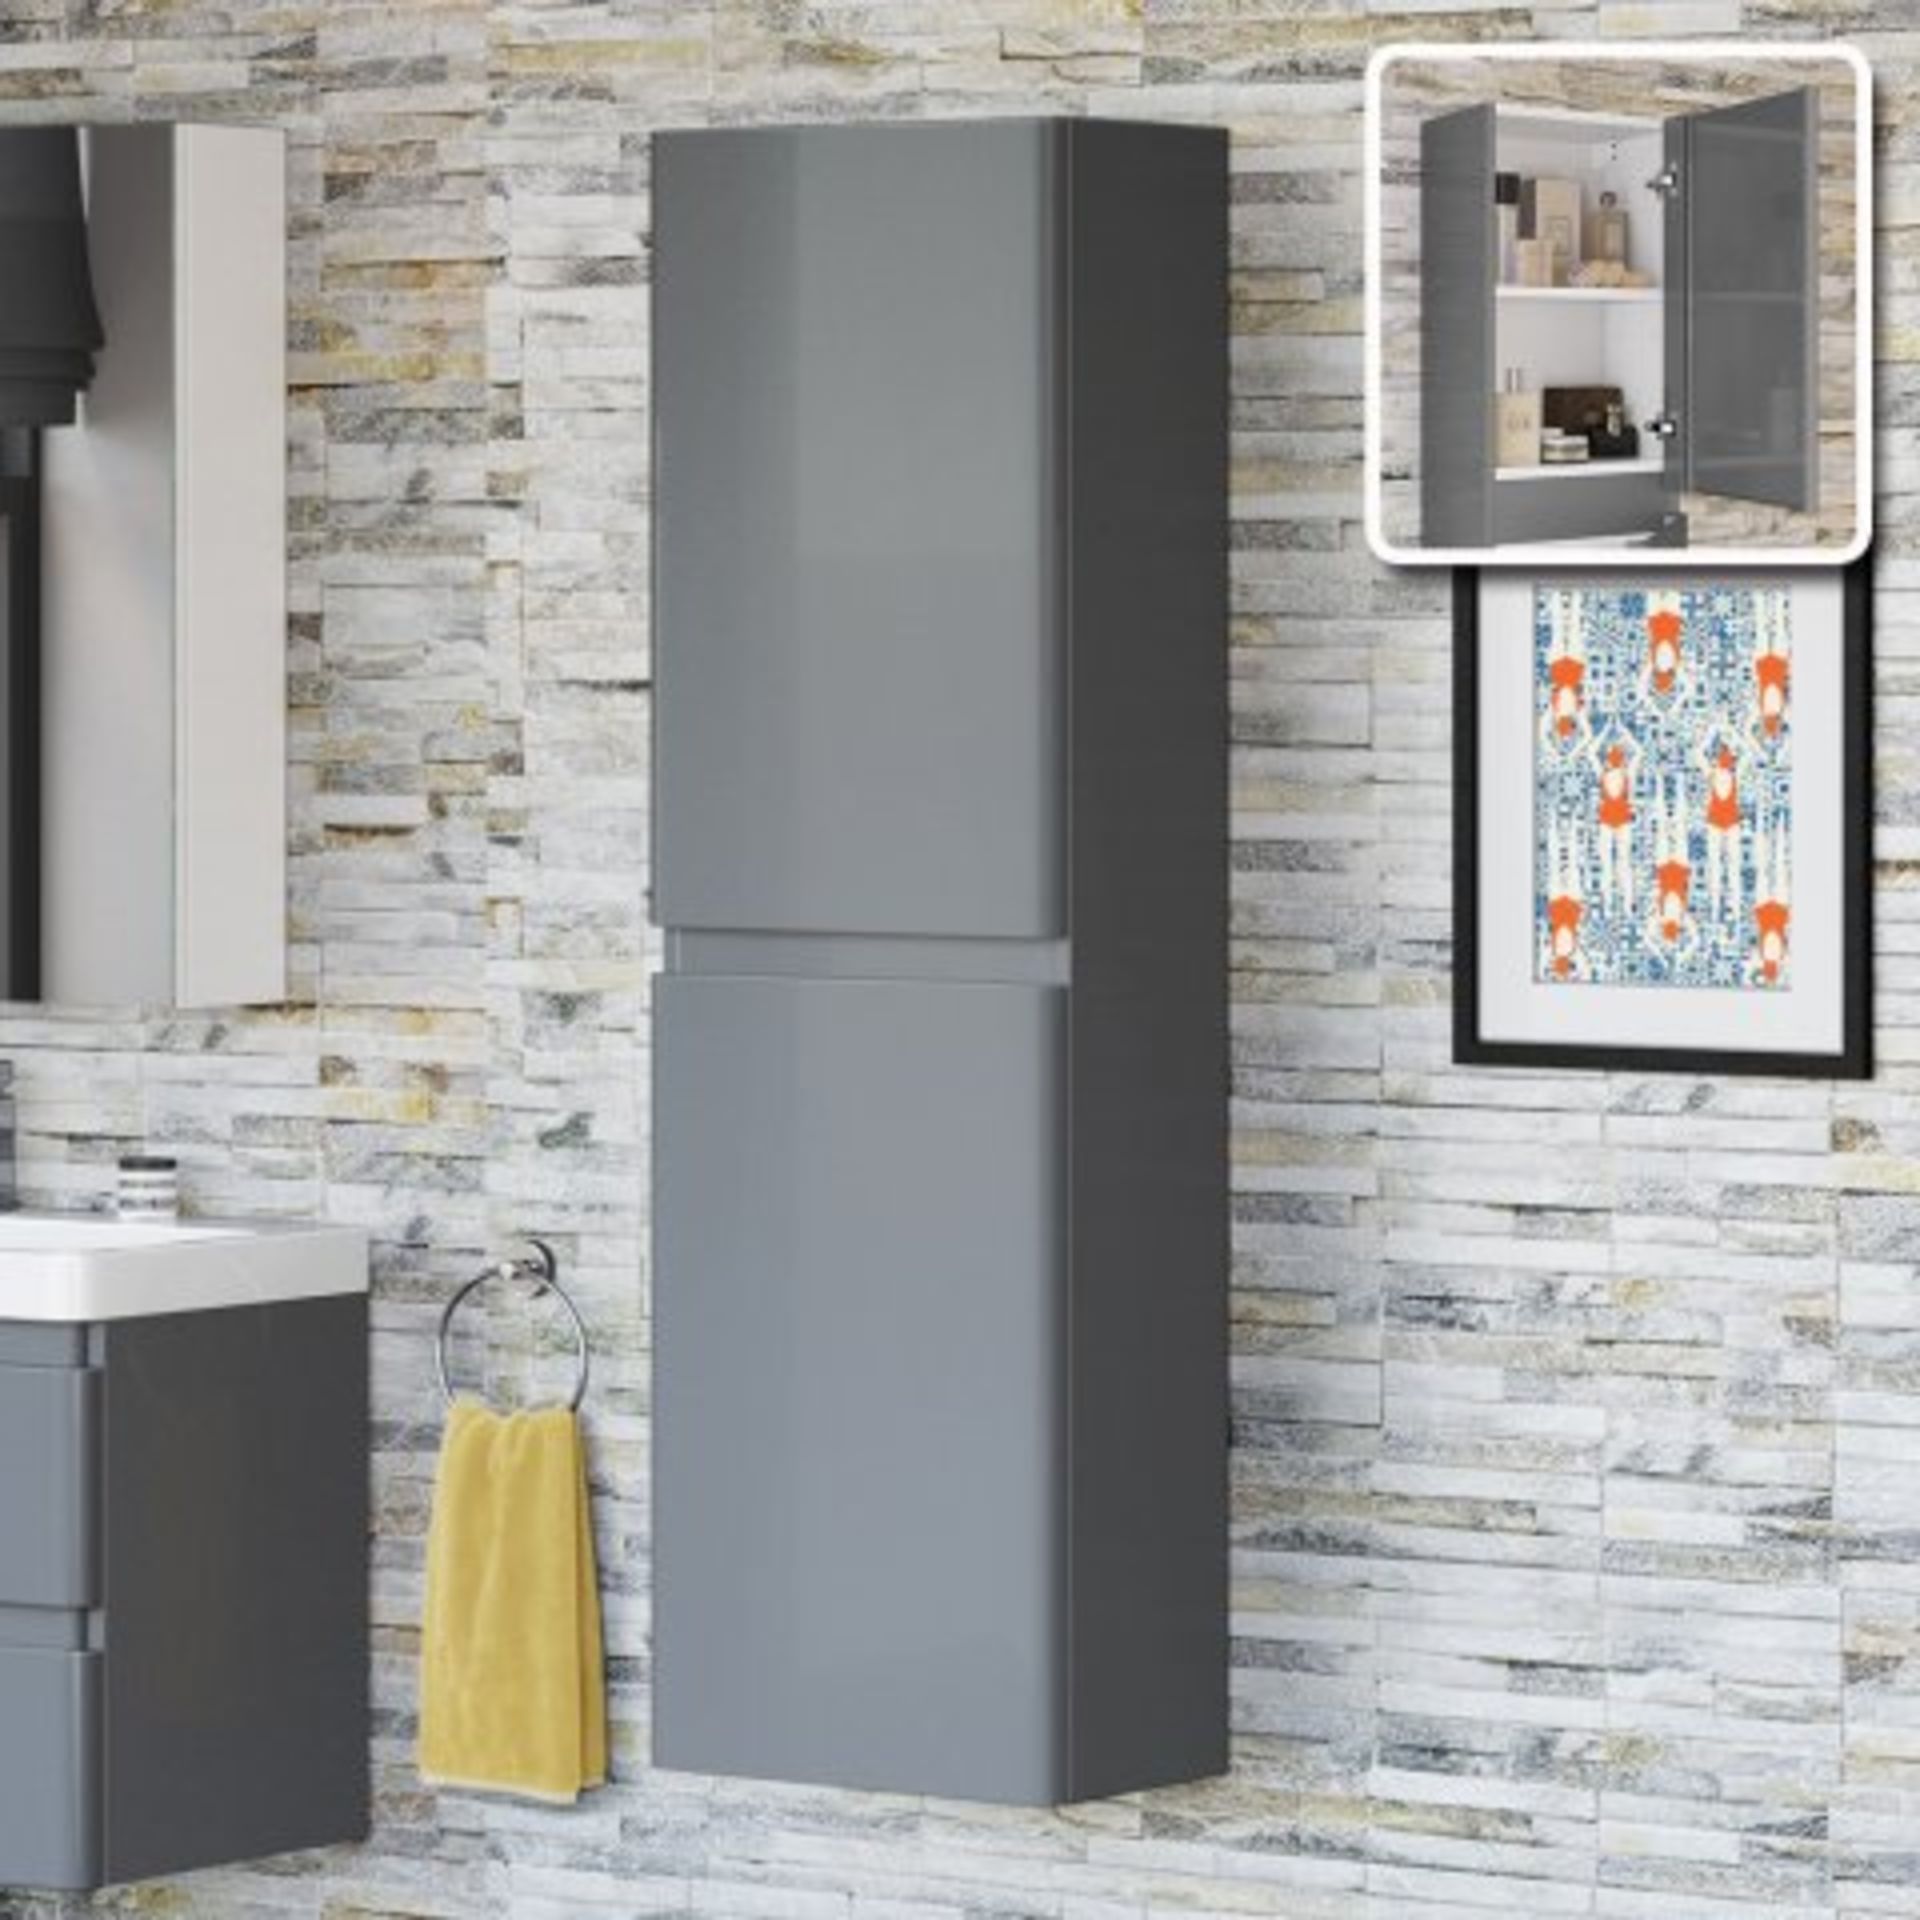 (H47) 1400mm Denver II Gloss Grey Tall Wall Hung Storage Cabinet - Wall Hung. RRP £299.99. With